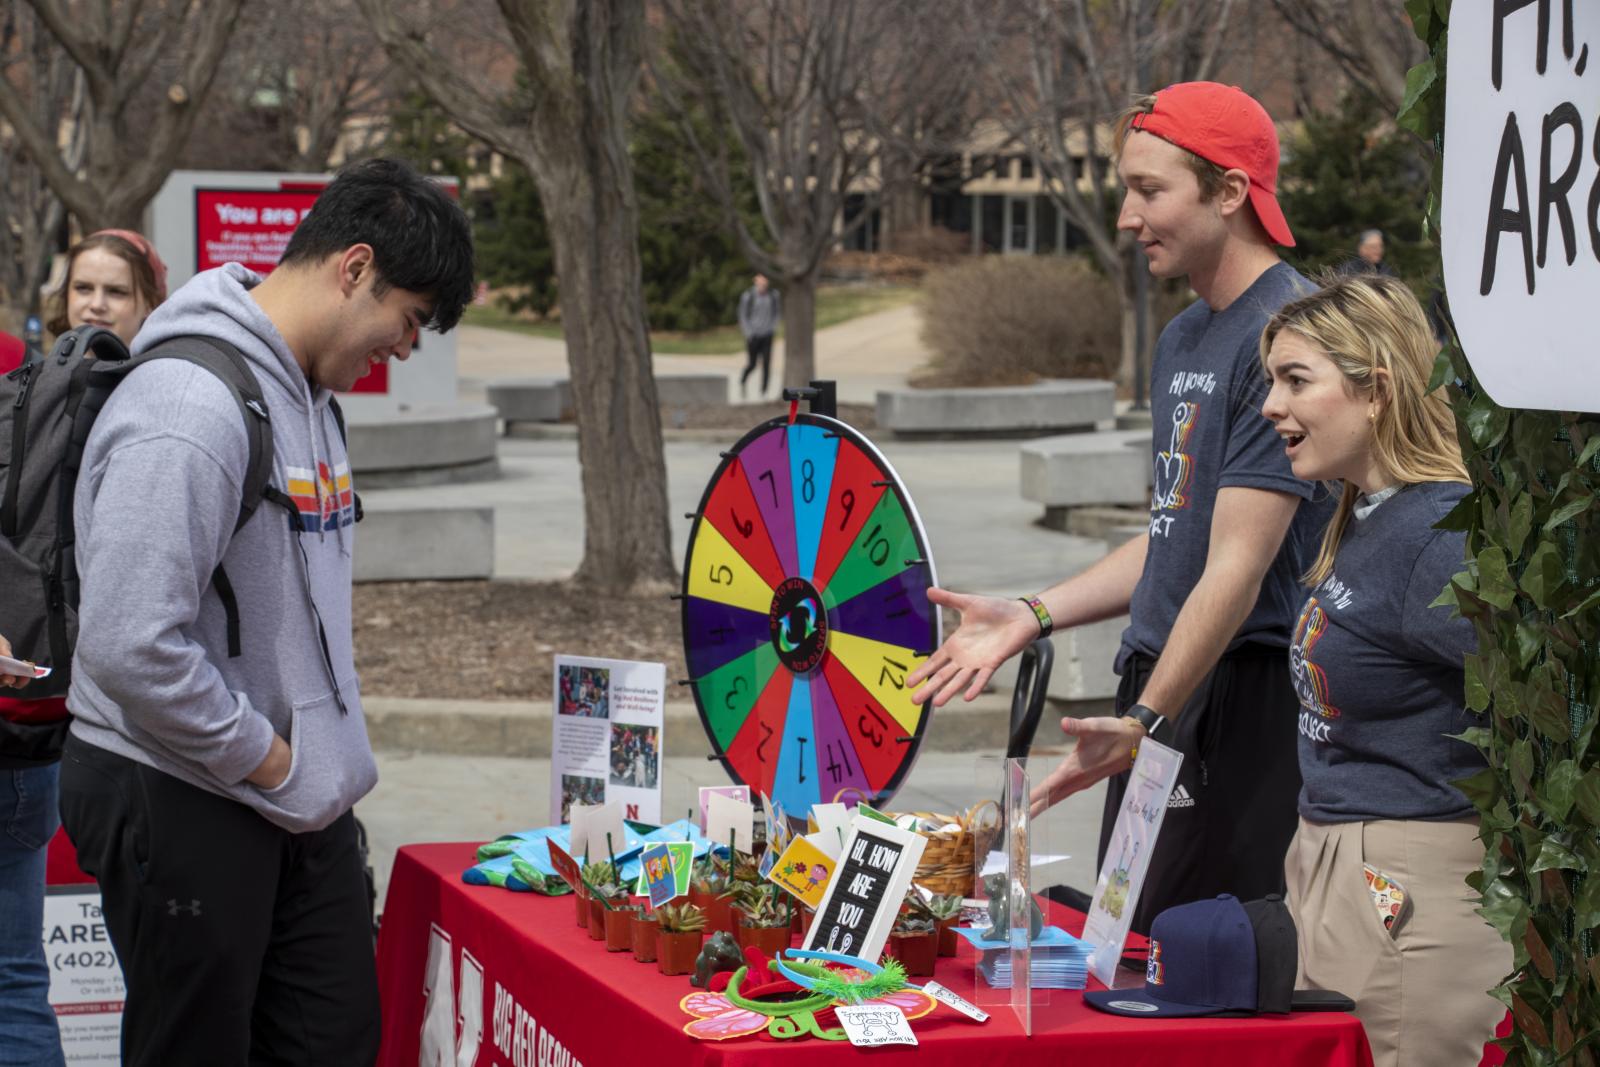 Students chat at tabling event